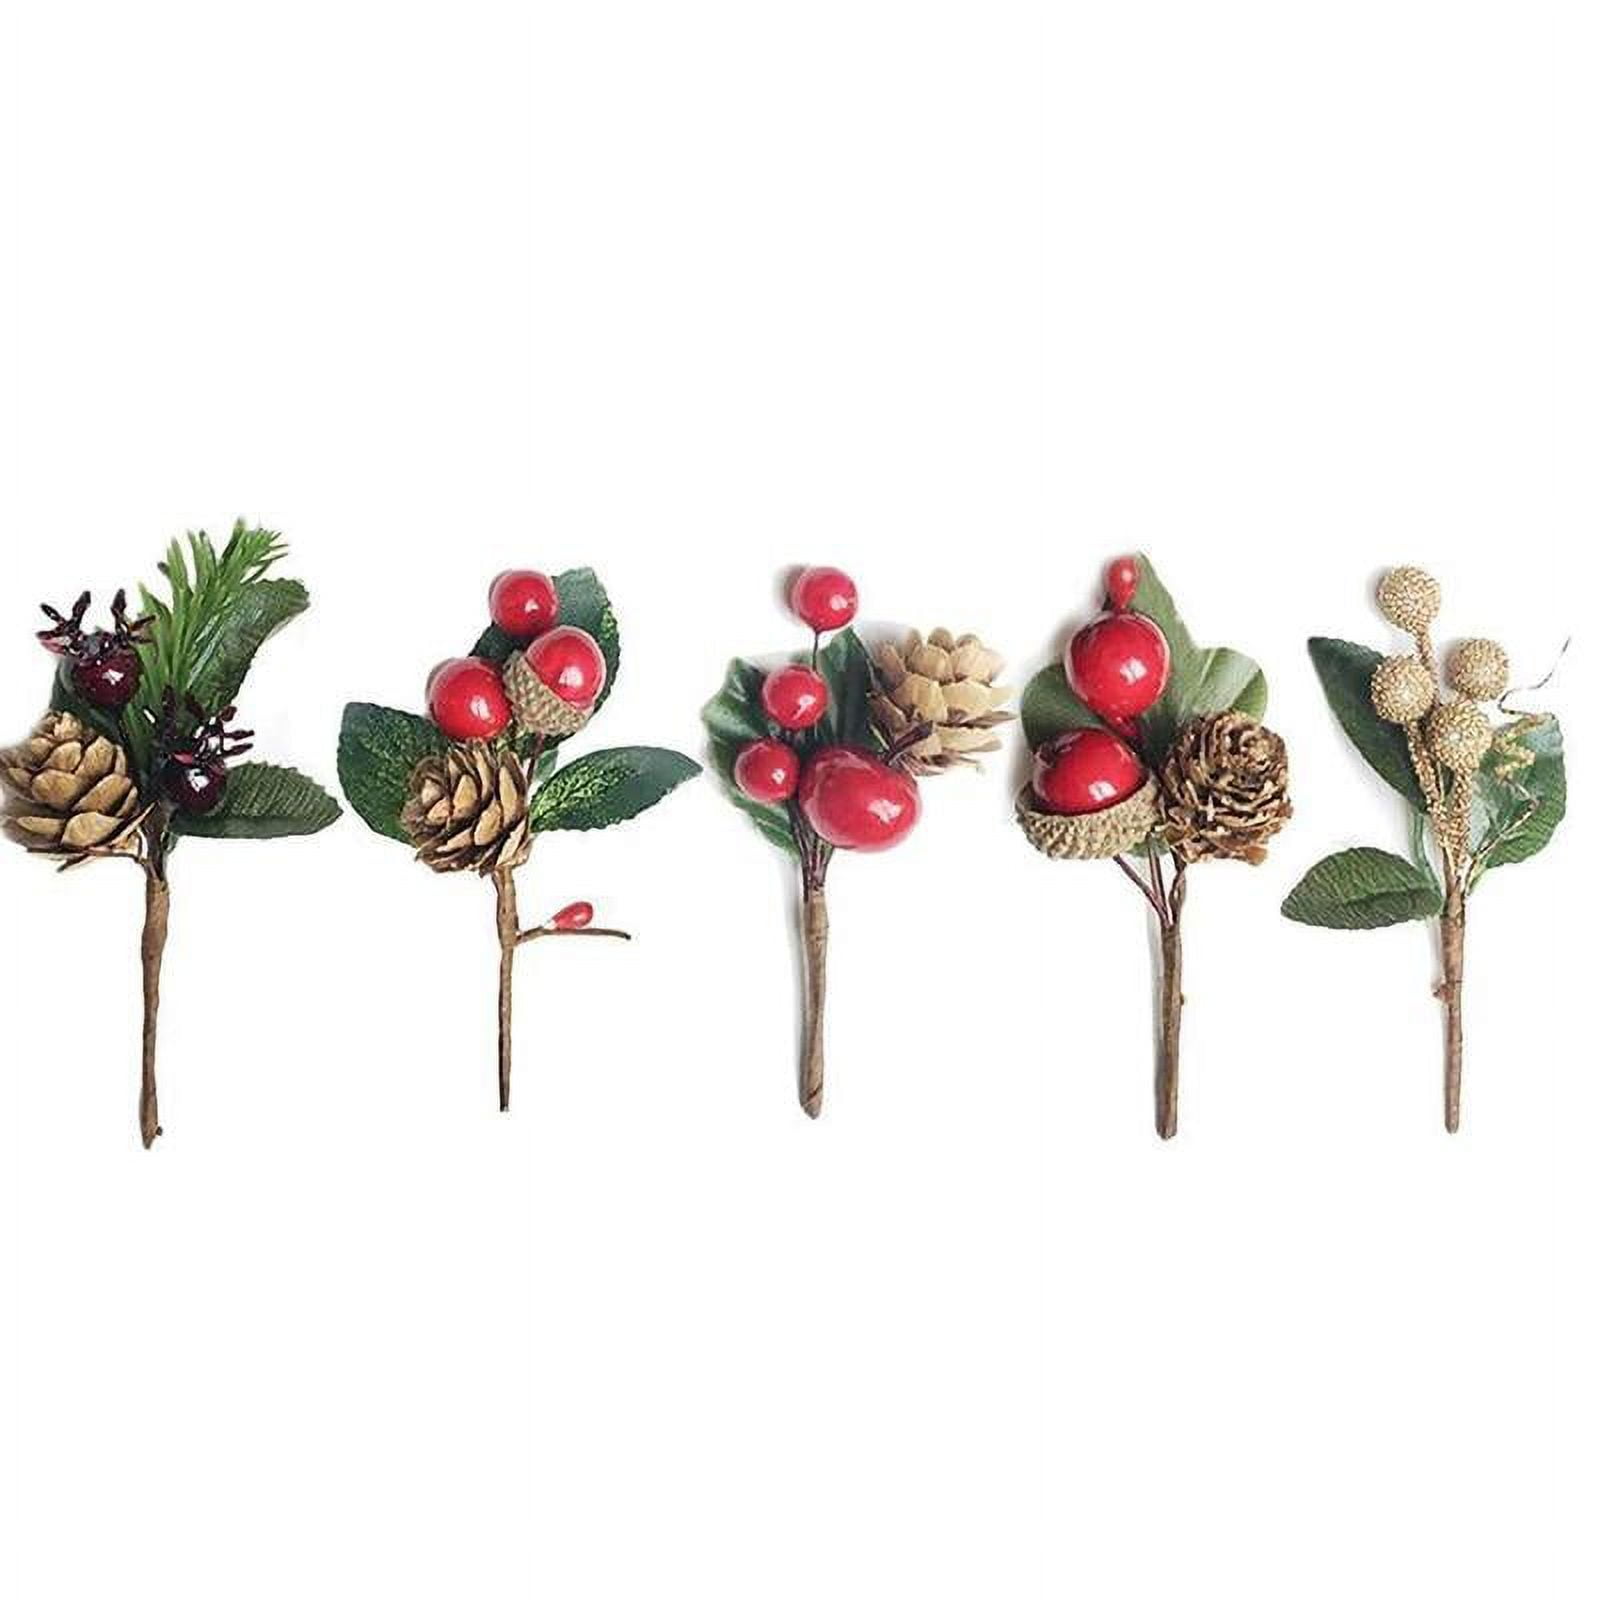  Craftsatin 20 Pcs Christmas Red Artificial Flowers Bouquet  Christmas Floral Pine Cones Holly Holiday Floral Picks for Xmas Tree Winter  Party Decoration DIY Indoor Table Centerpieces : Home & Kitchen